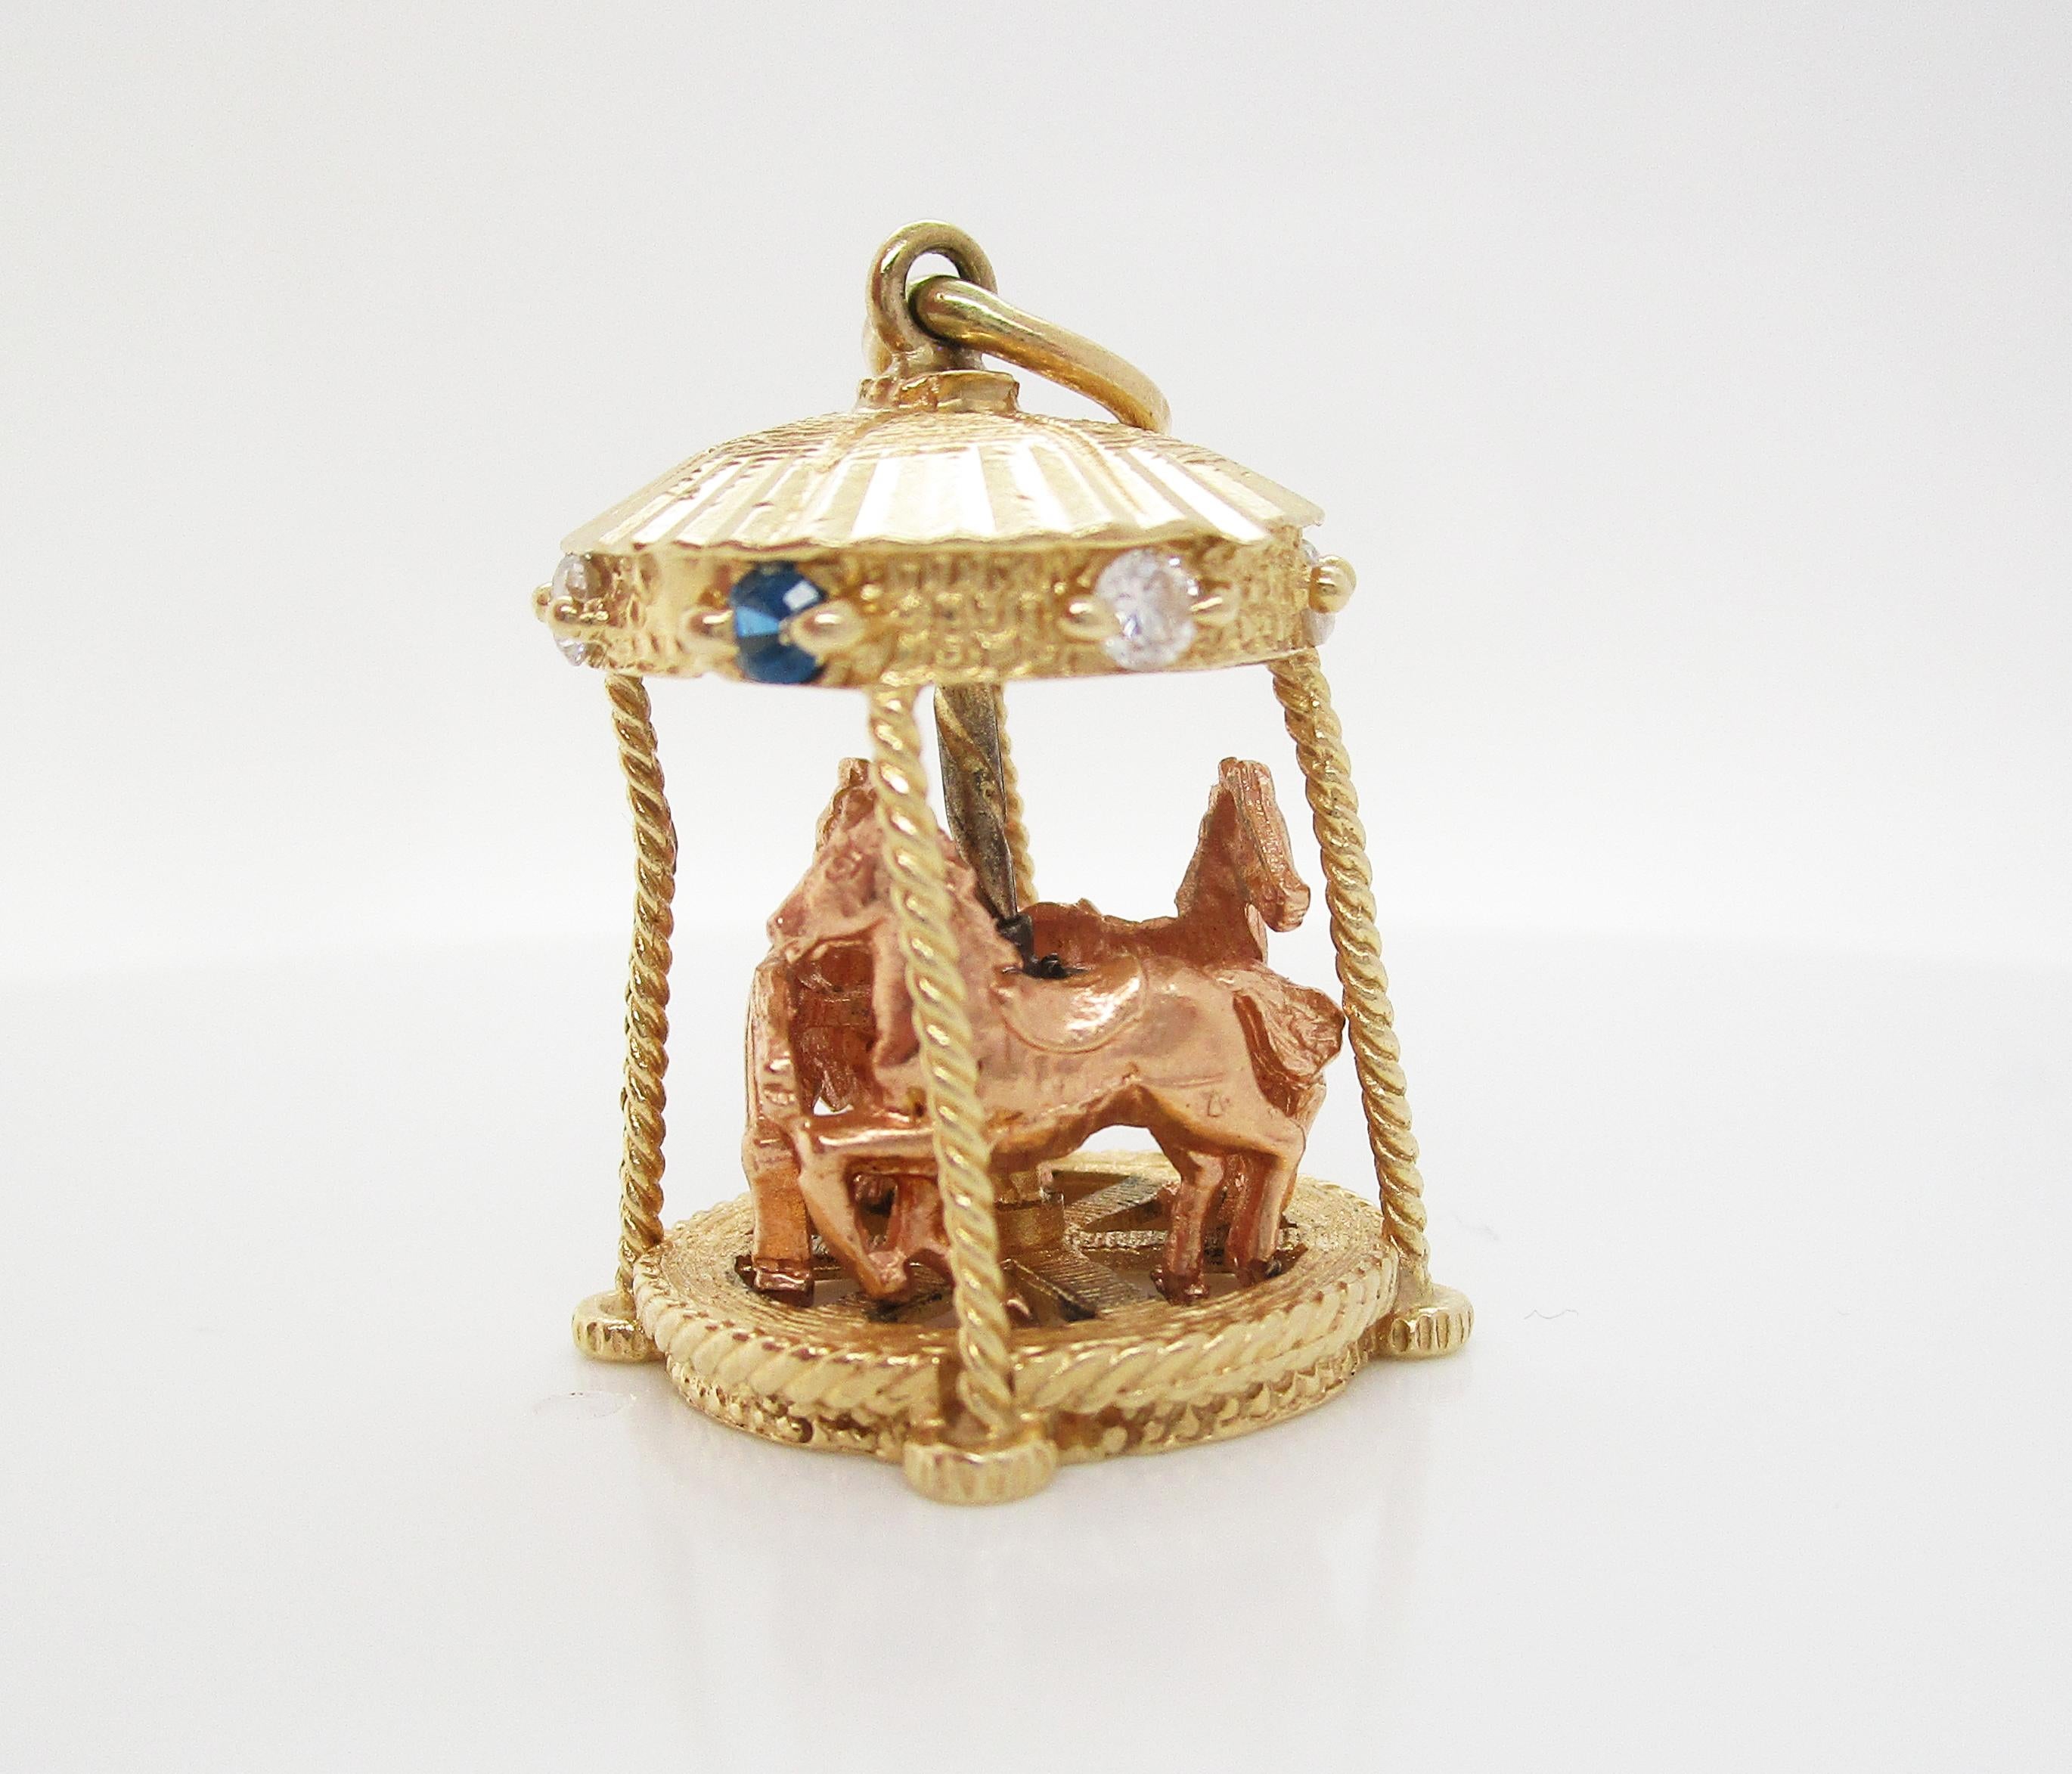 This incredible mid-century pendant is in 14k yellow gold and is an awesome moving carousel design! The carousel is all 14k yellow gold and features three rose gold horses that really move up, down, and around the carousel! The top of the carousel